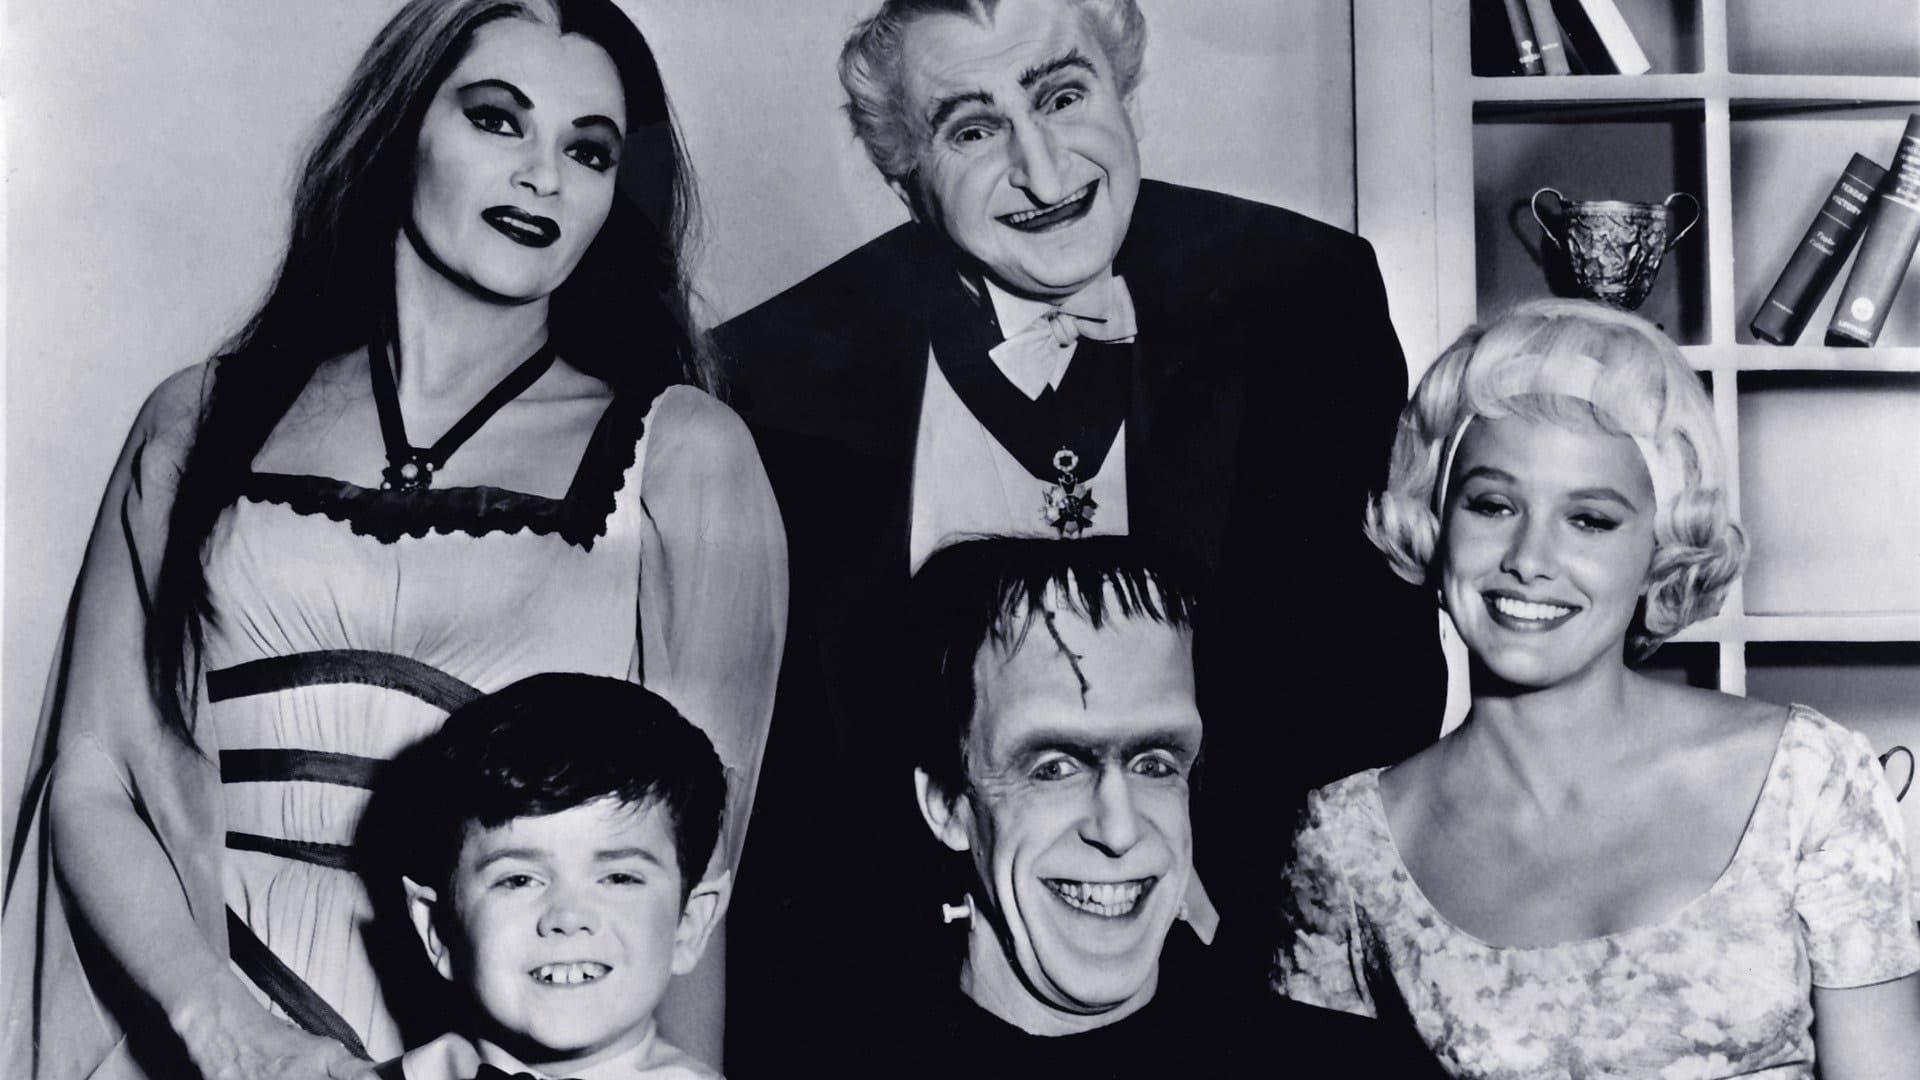 The Munsters backdrop